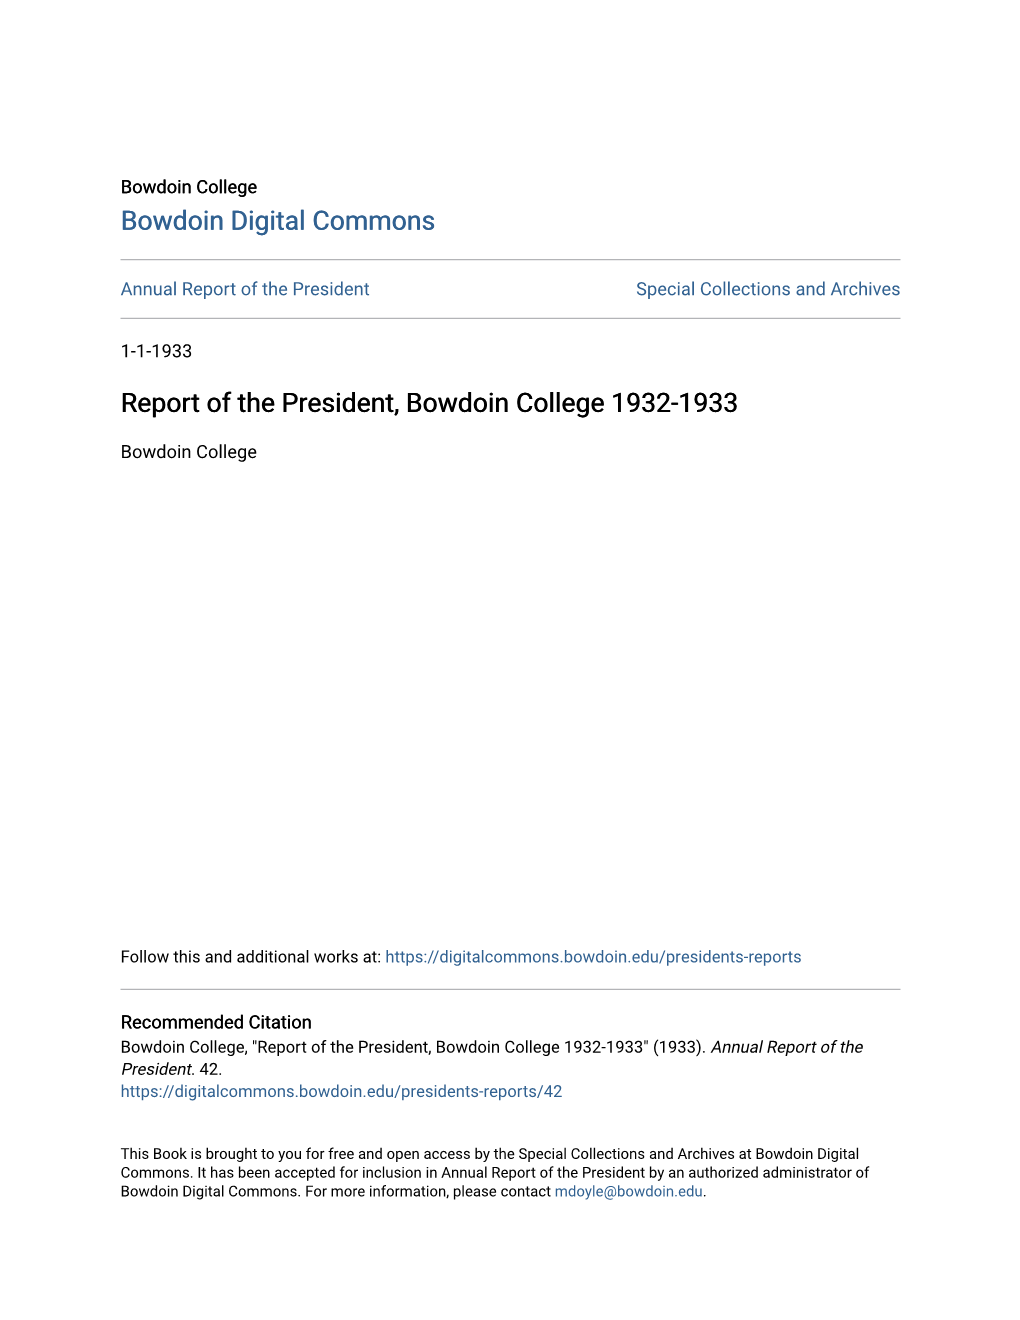 Report of the President, Bowdoin College 1932-1933